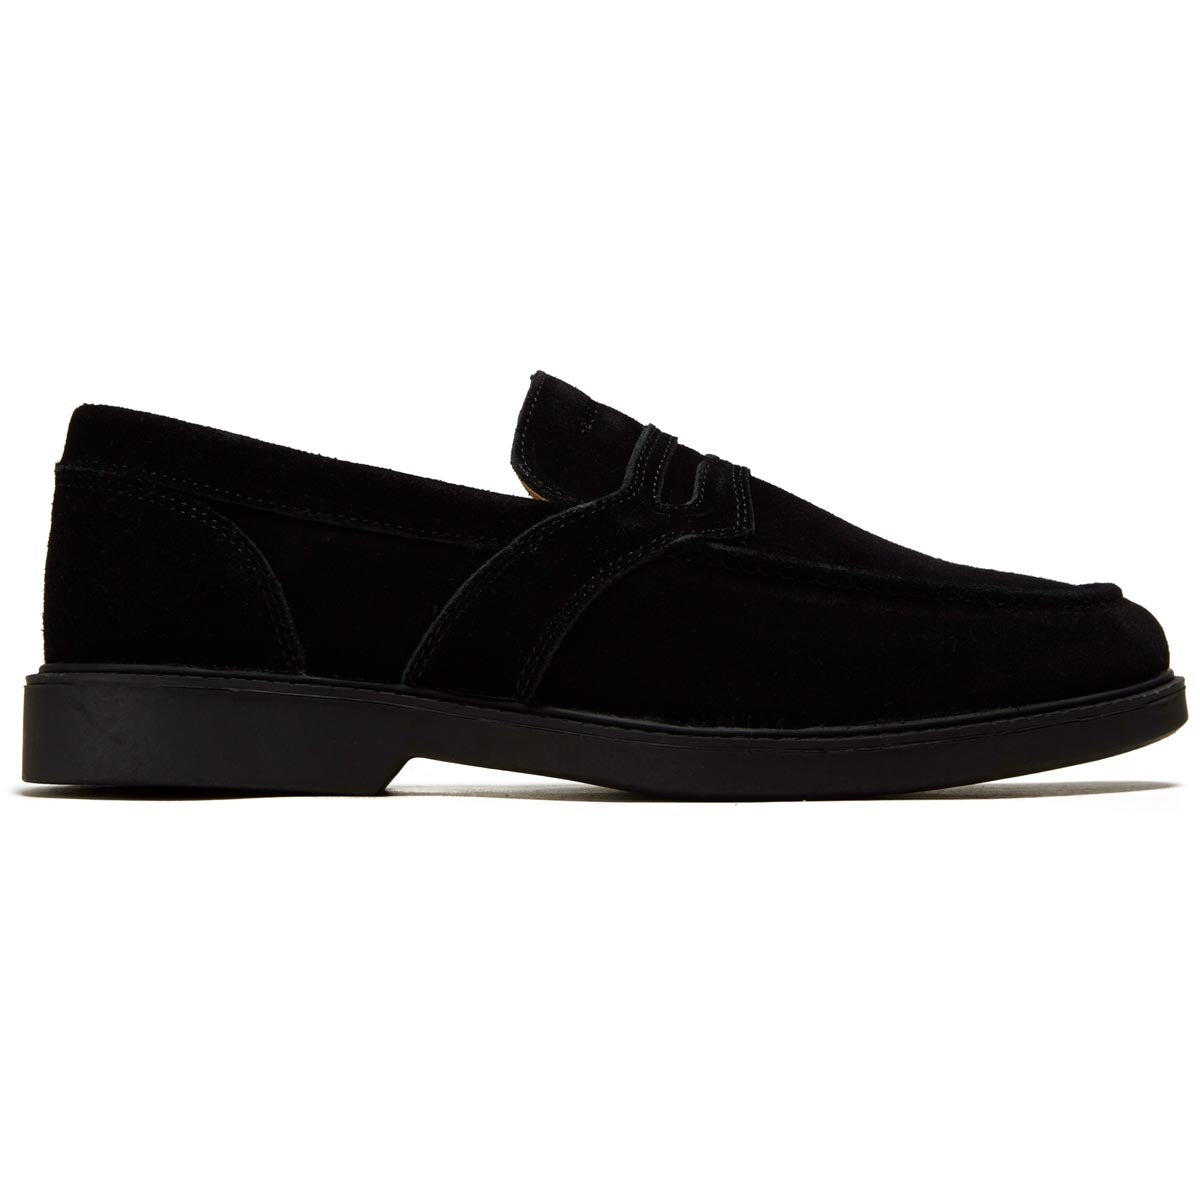 Hours Is Yours Cohiba Penny Loafer Shoes - Black Suede image 1